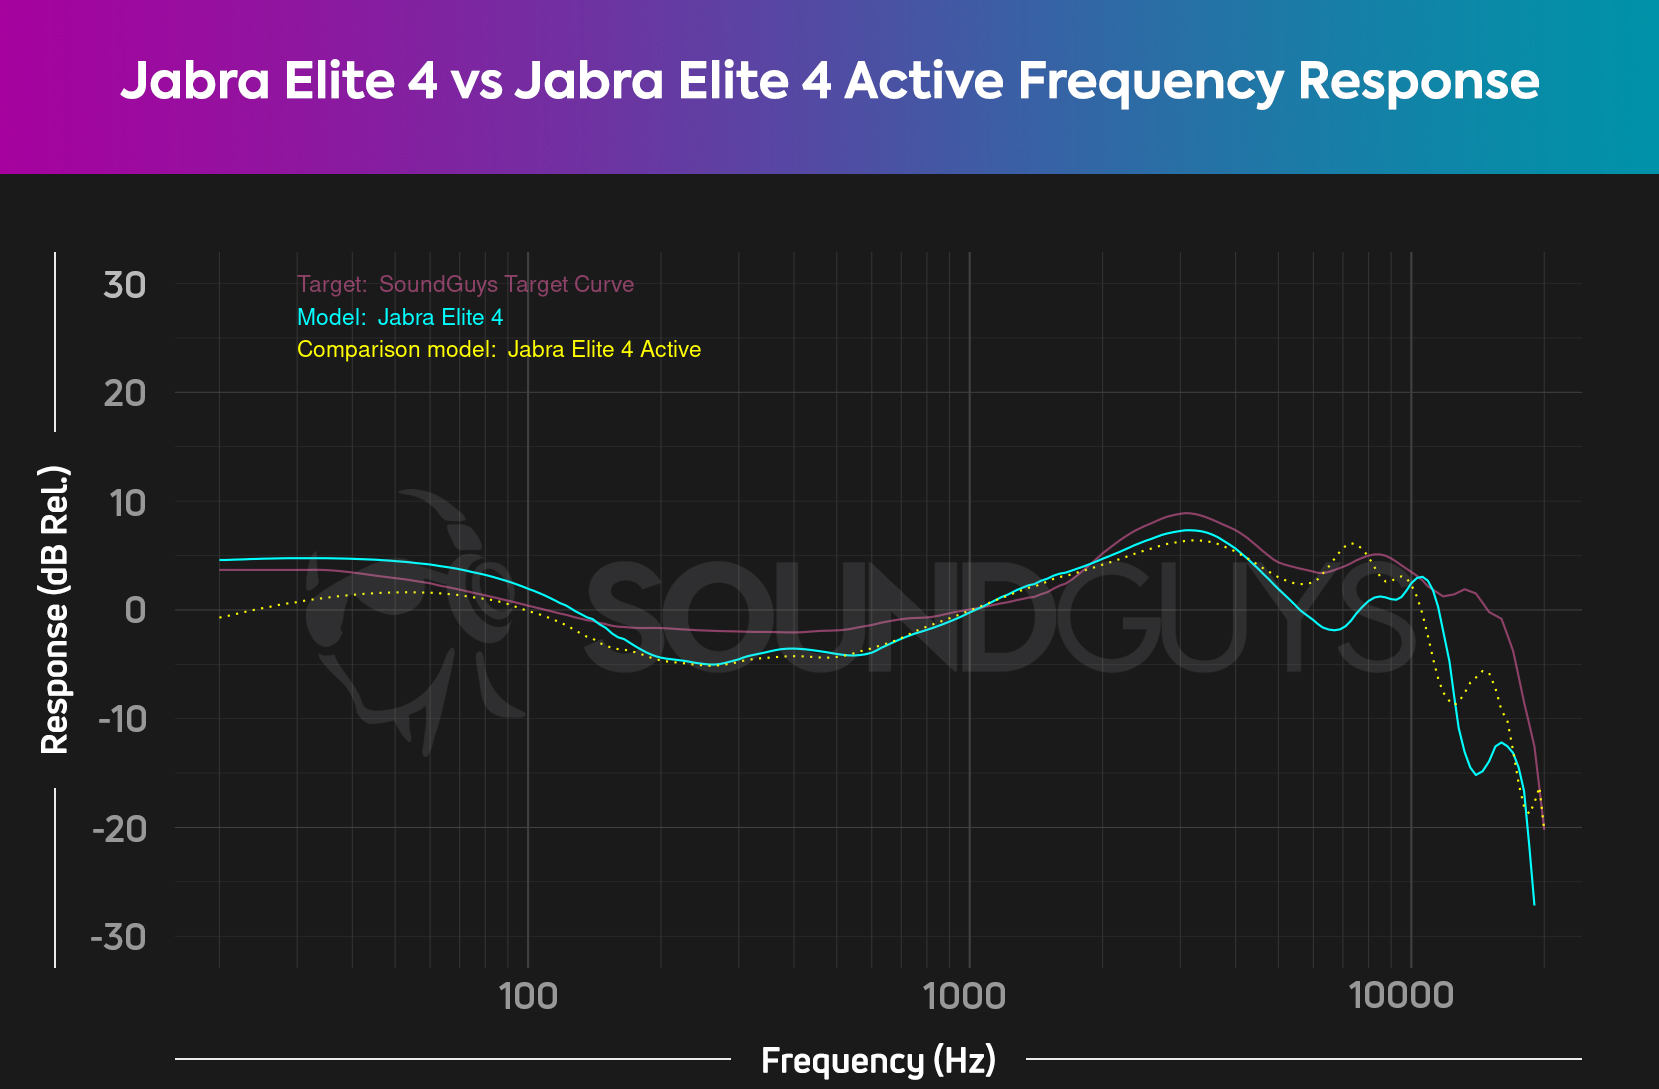 The frequency responses of the Jabra Elite 4 set against the Jabra Elite 4 Active and the target curve.